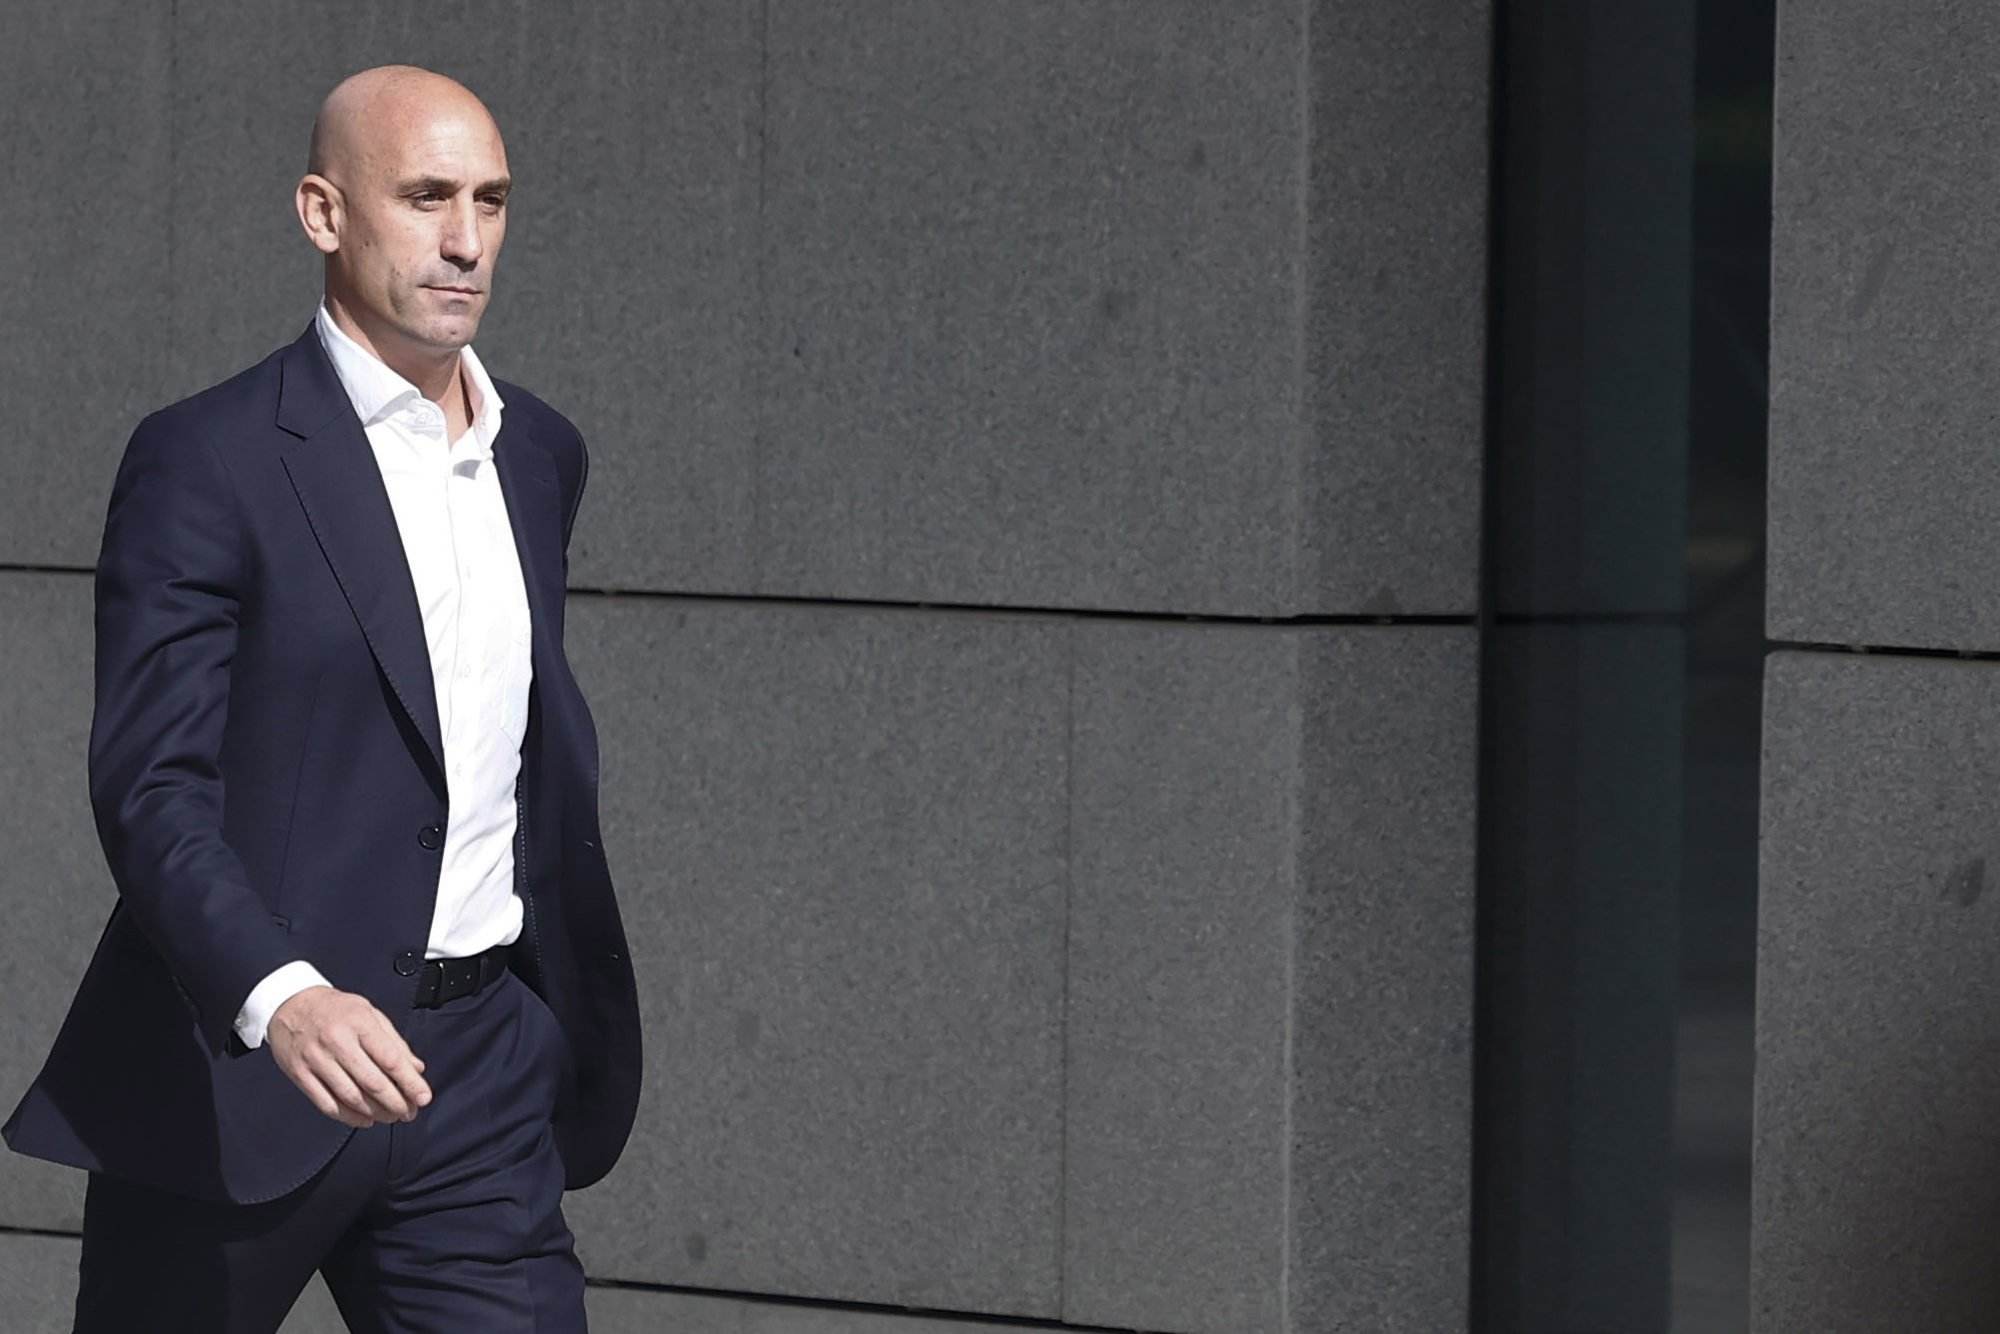 FIFA bans Luis Rubiales from all football-related activities for three years